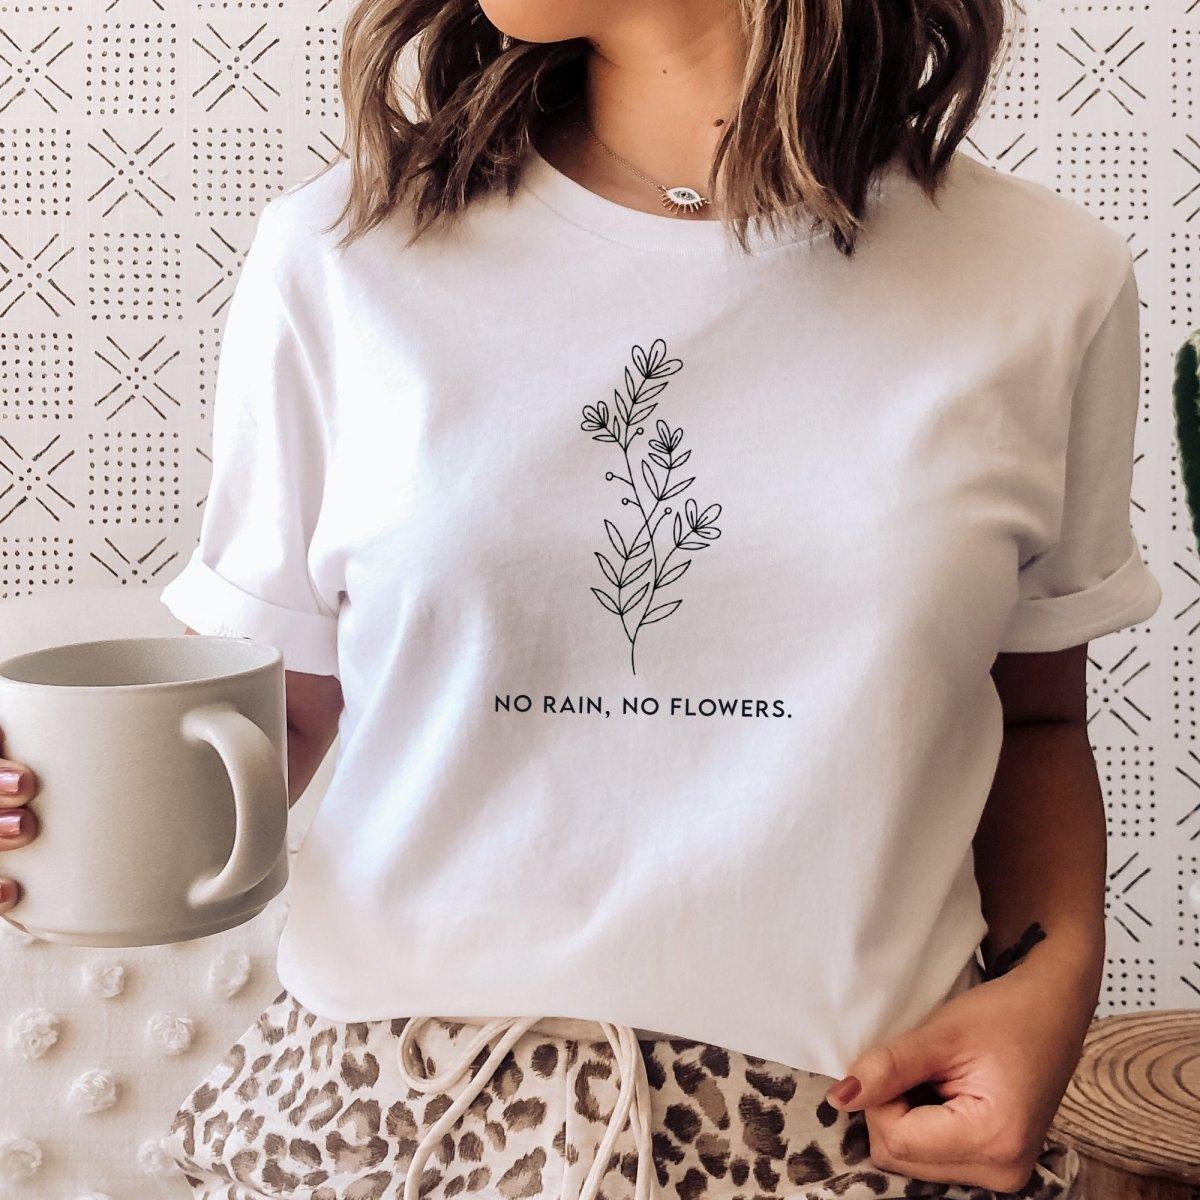 No Rain No Flowers T-Shirt, Positive Thoughts, Inspirational Quote Tshirt, Nature Top, Women&#39;s Slogan Top, Positive Quote Shirt, Empowerment - Amy Lucy